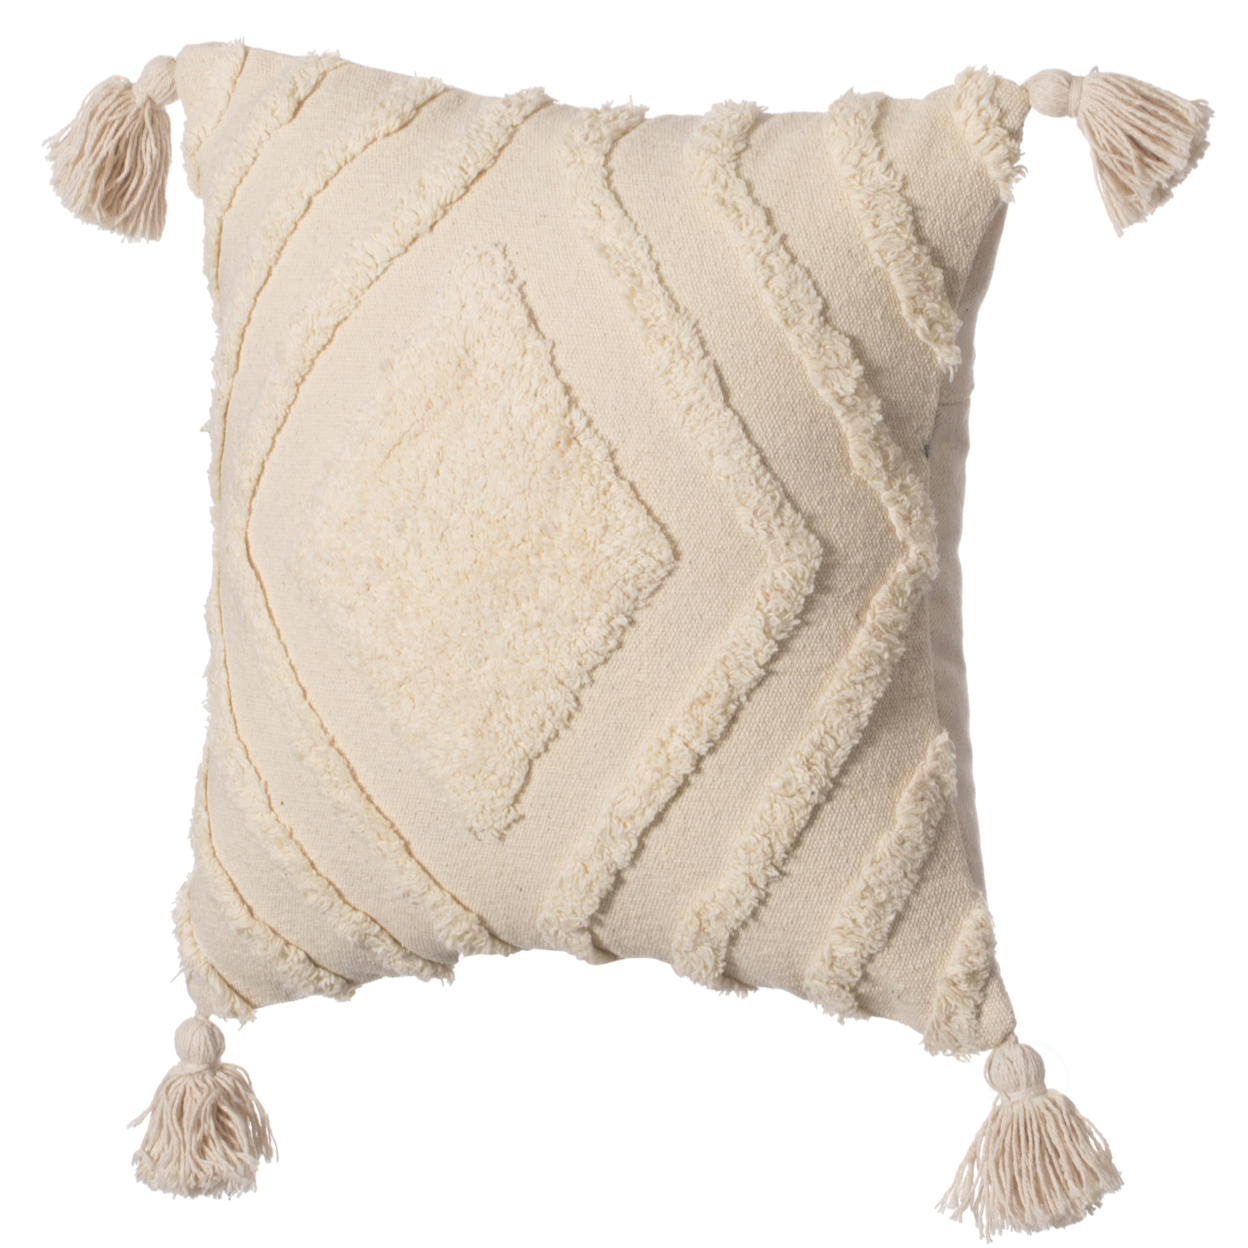 16 Handwoven Cotton Throw Pillow Cover With White On White Tufted Design And Tassel Corners - Ikat